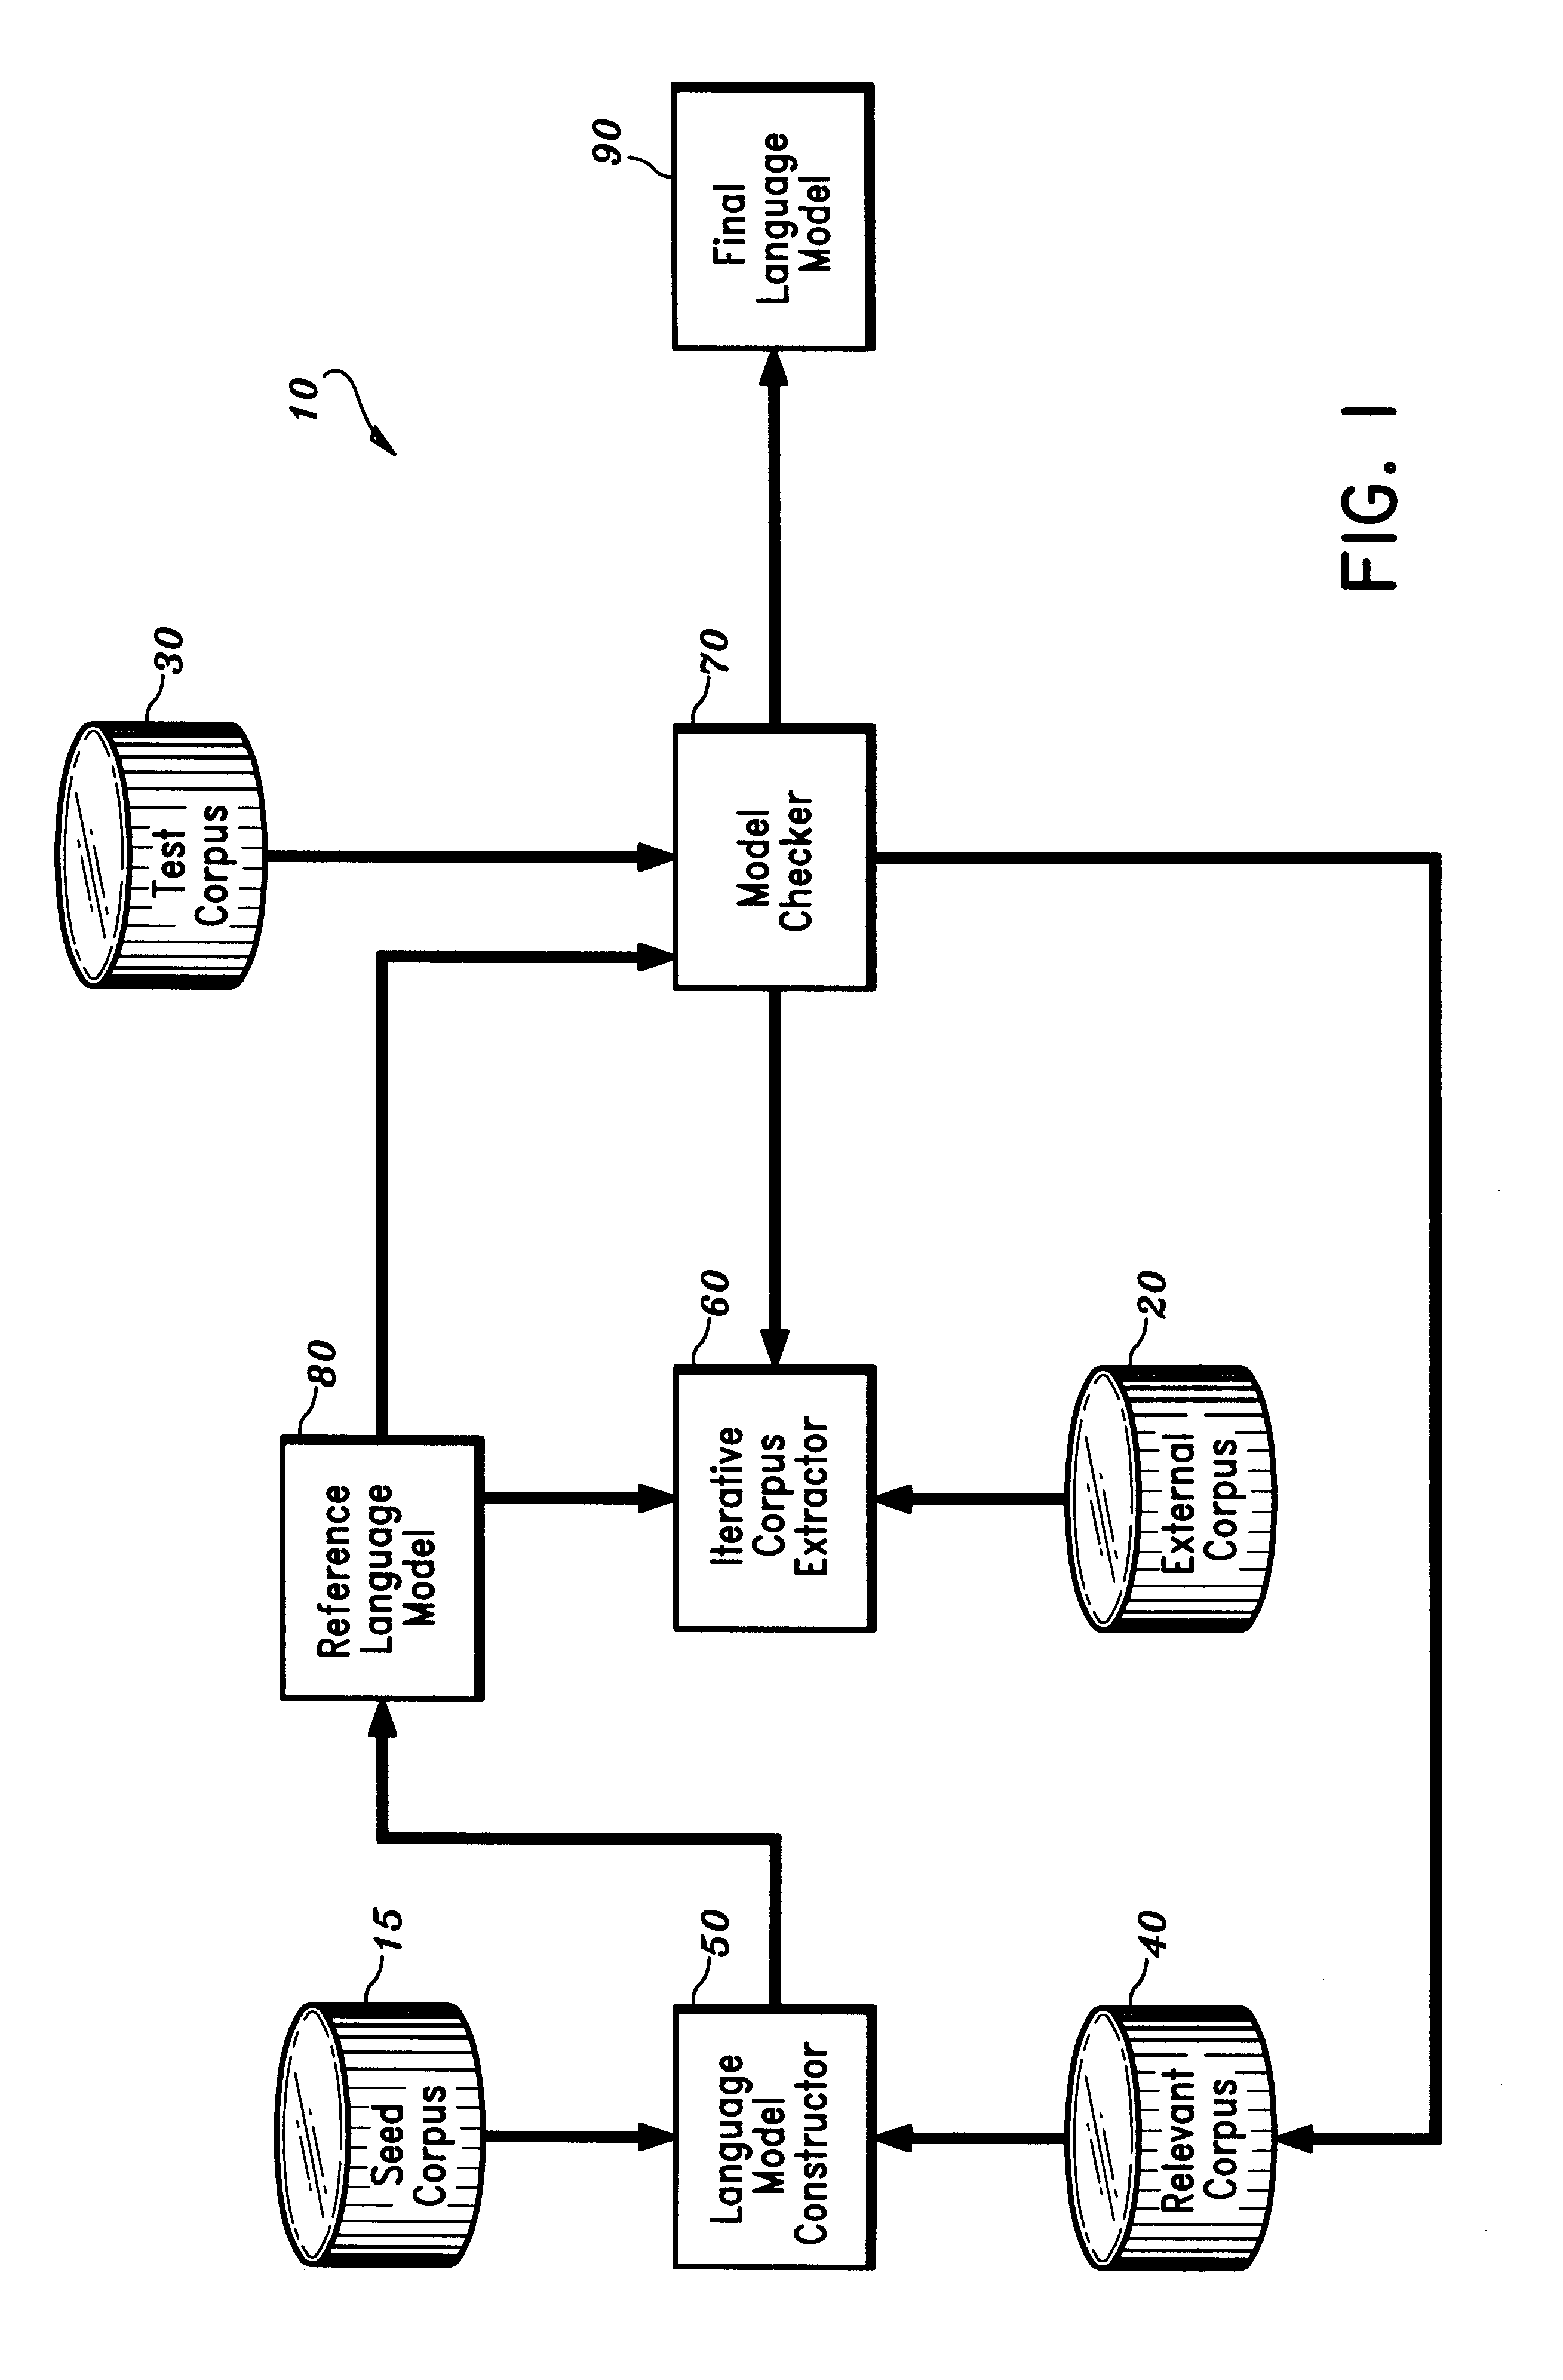 Apparatus and method for building domain-specific language models